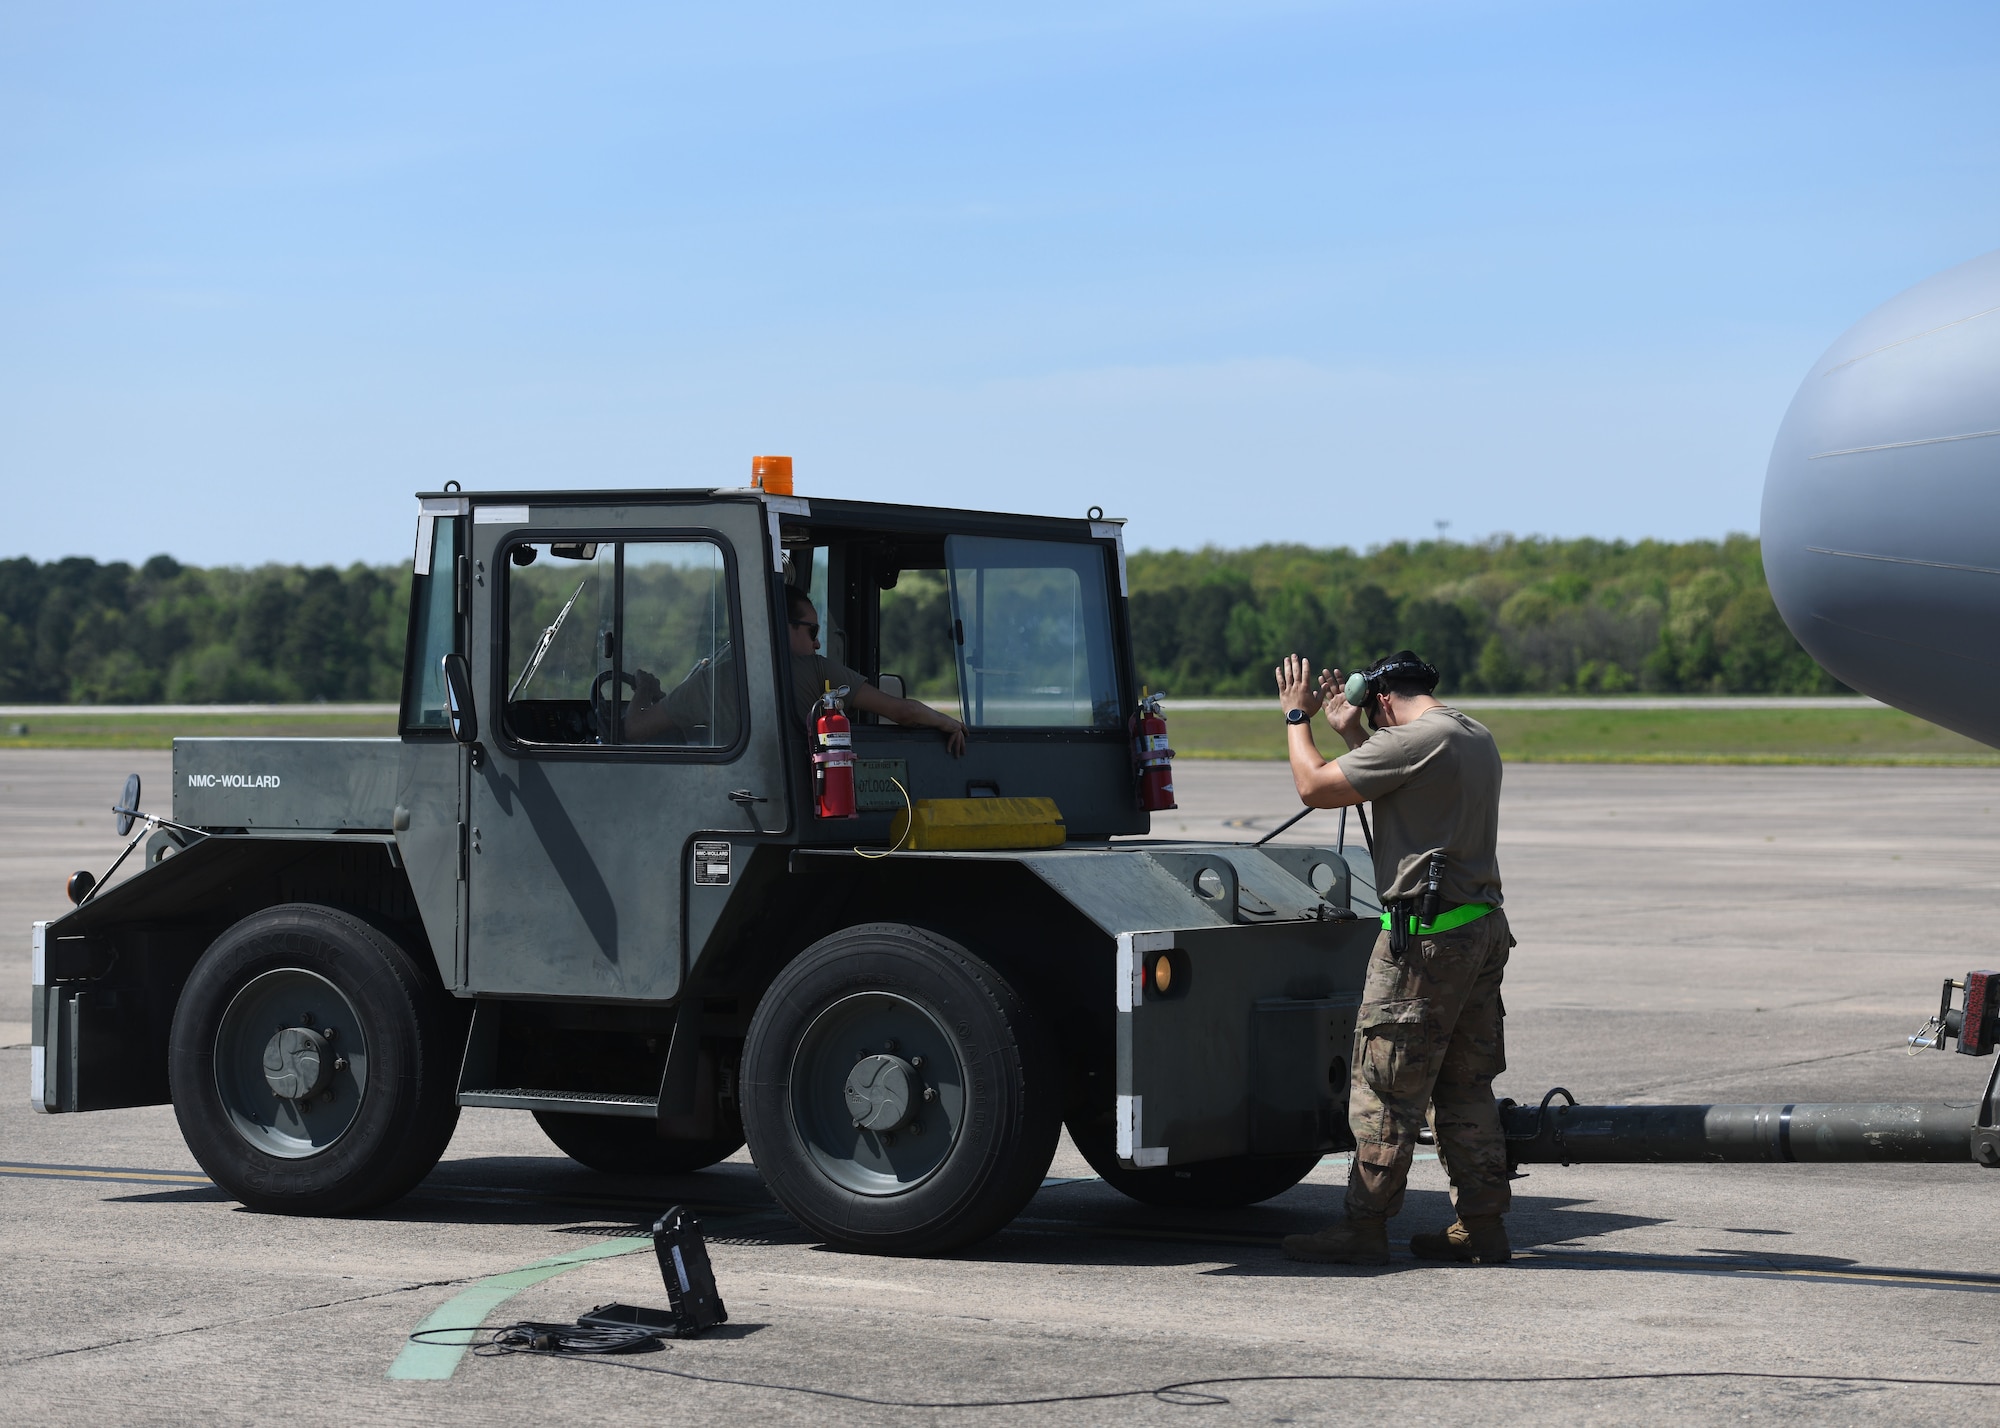 An Airman directs a tow vehicle to a towing hitch.